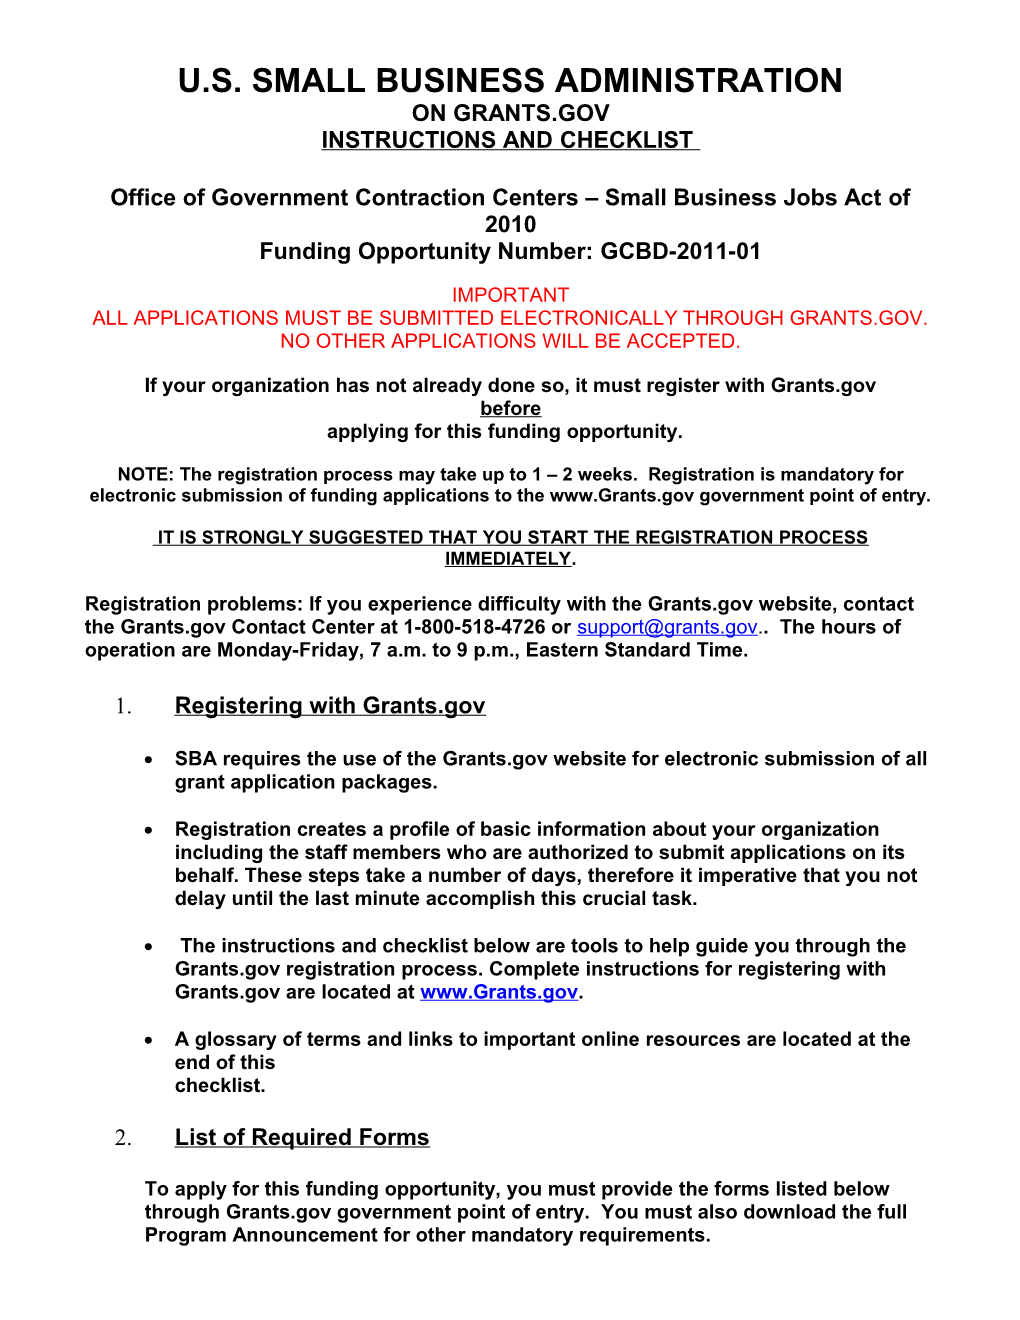 Office of Government Contraction Centers Small Business Jobs Act of 2010